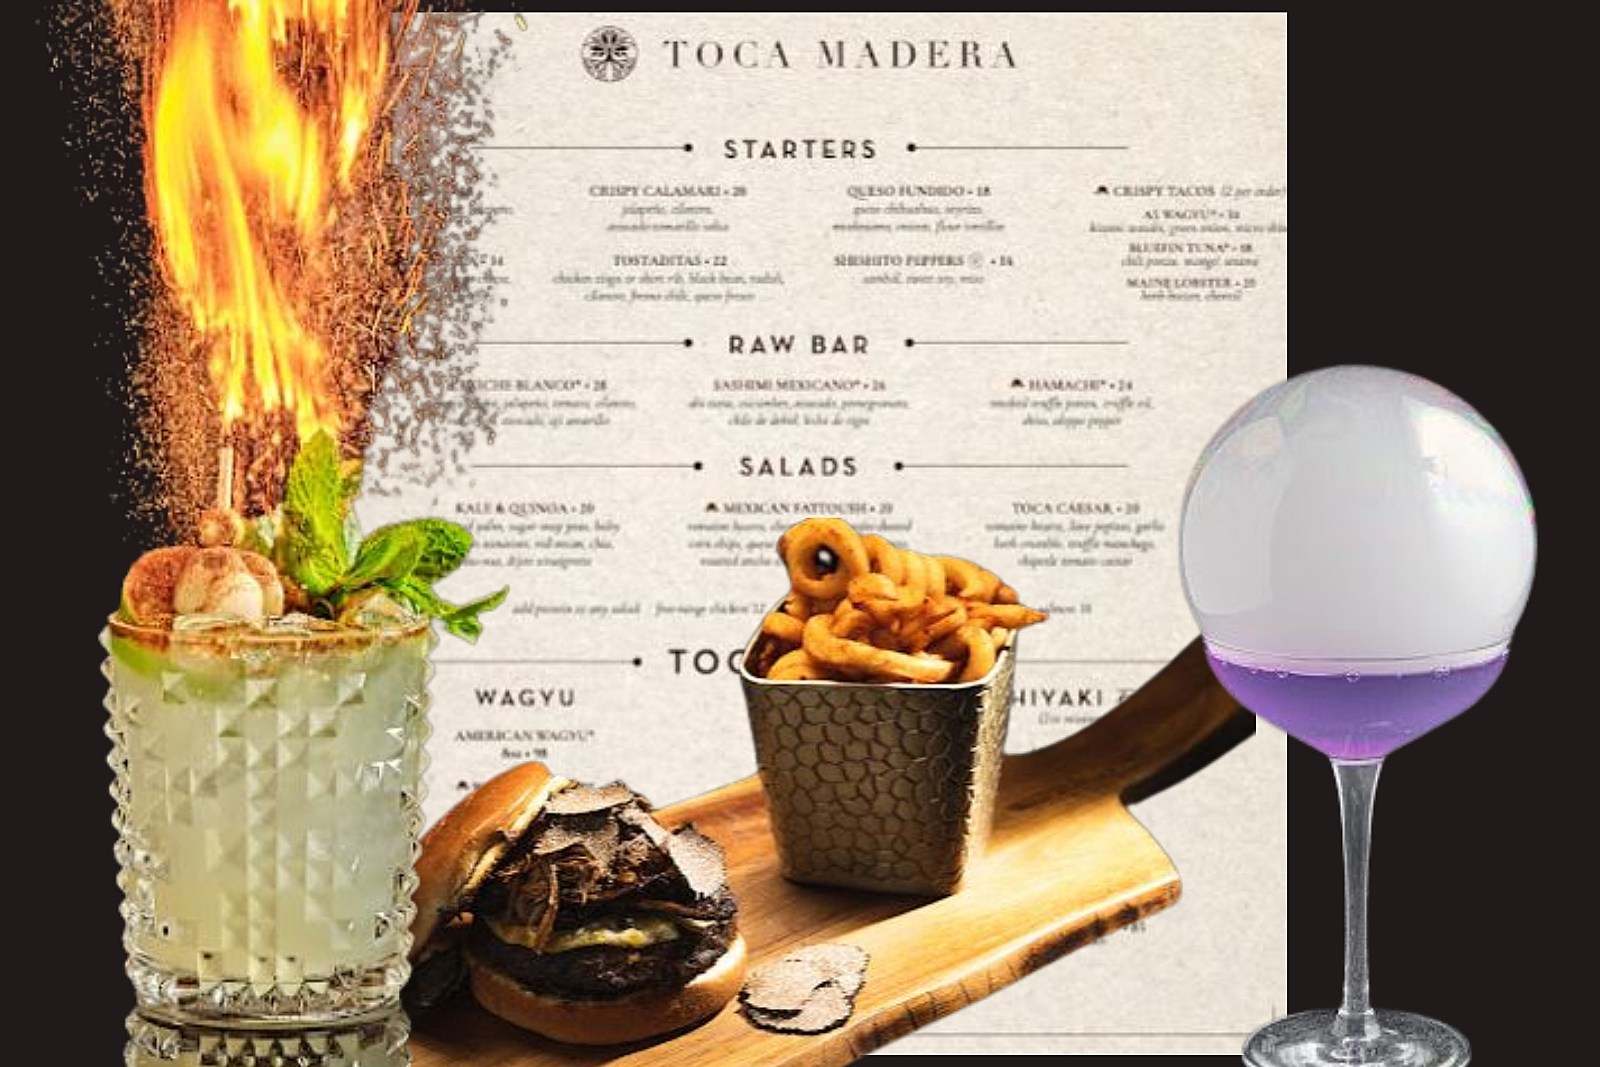 Inside the Hot West Hollywood Restaurant of Bhad Bhabie's Fight Toca Madera Menu 